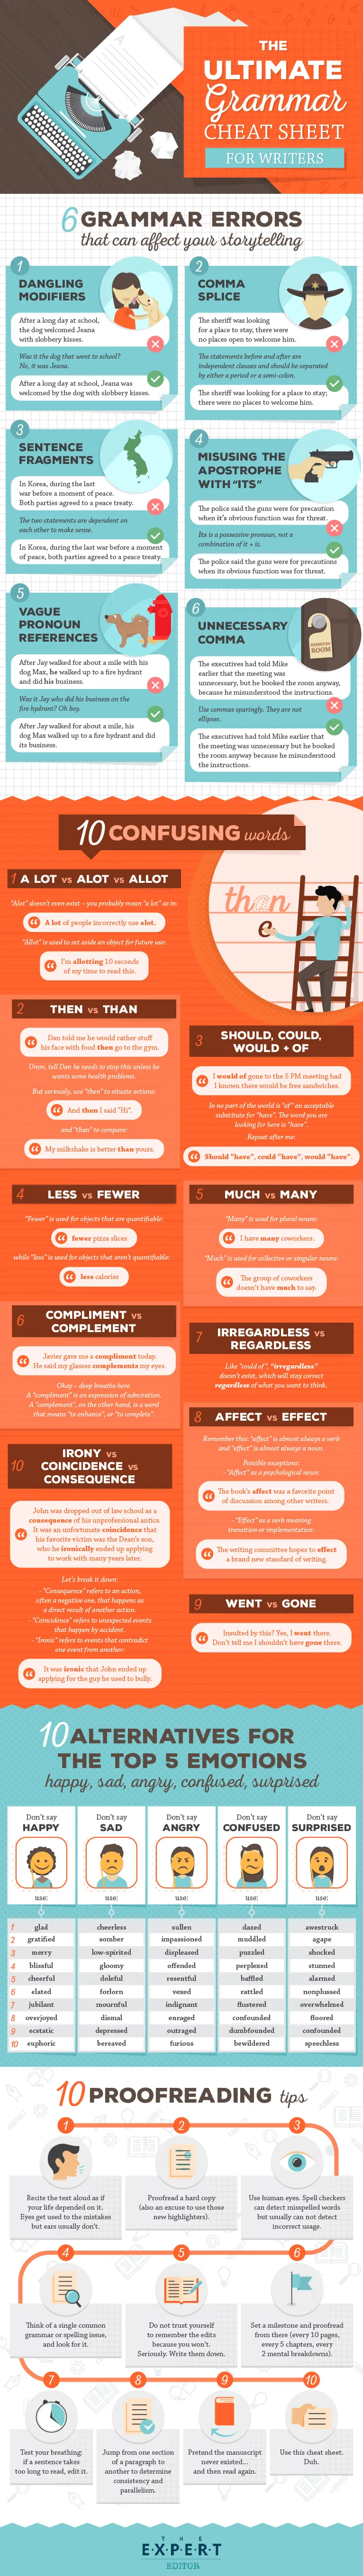 The ultimate grammar cheat sheet for writers